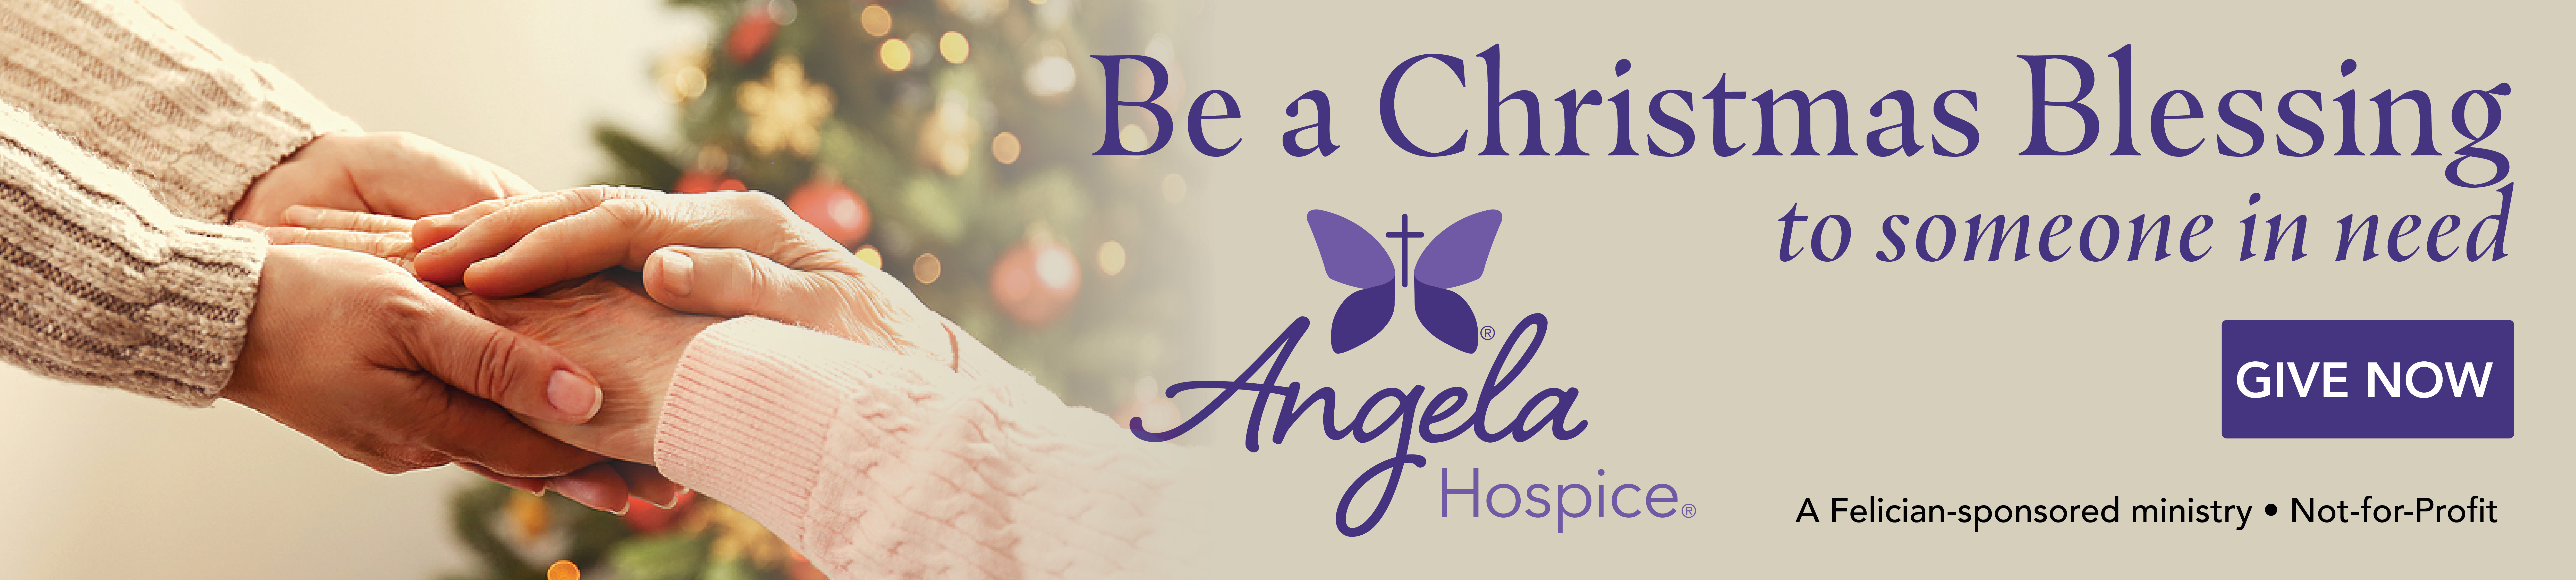 Angela Hospice - Small Banner 1 - ad-23